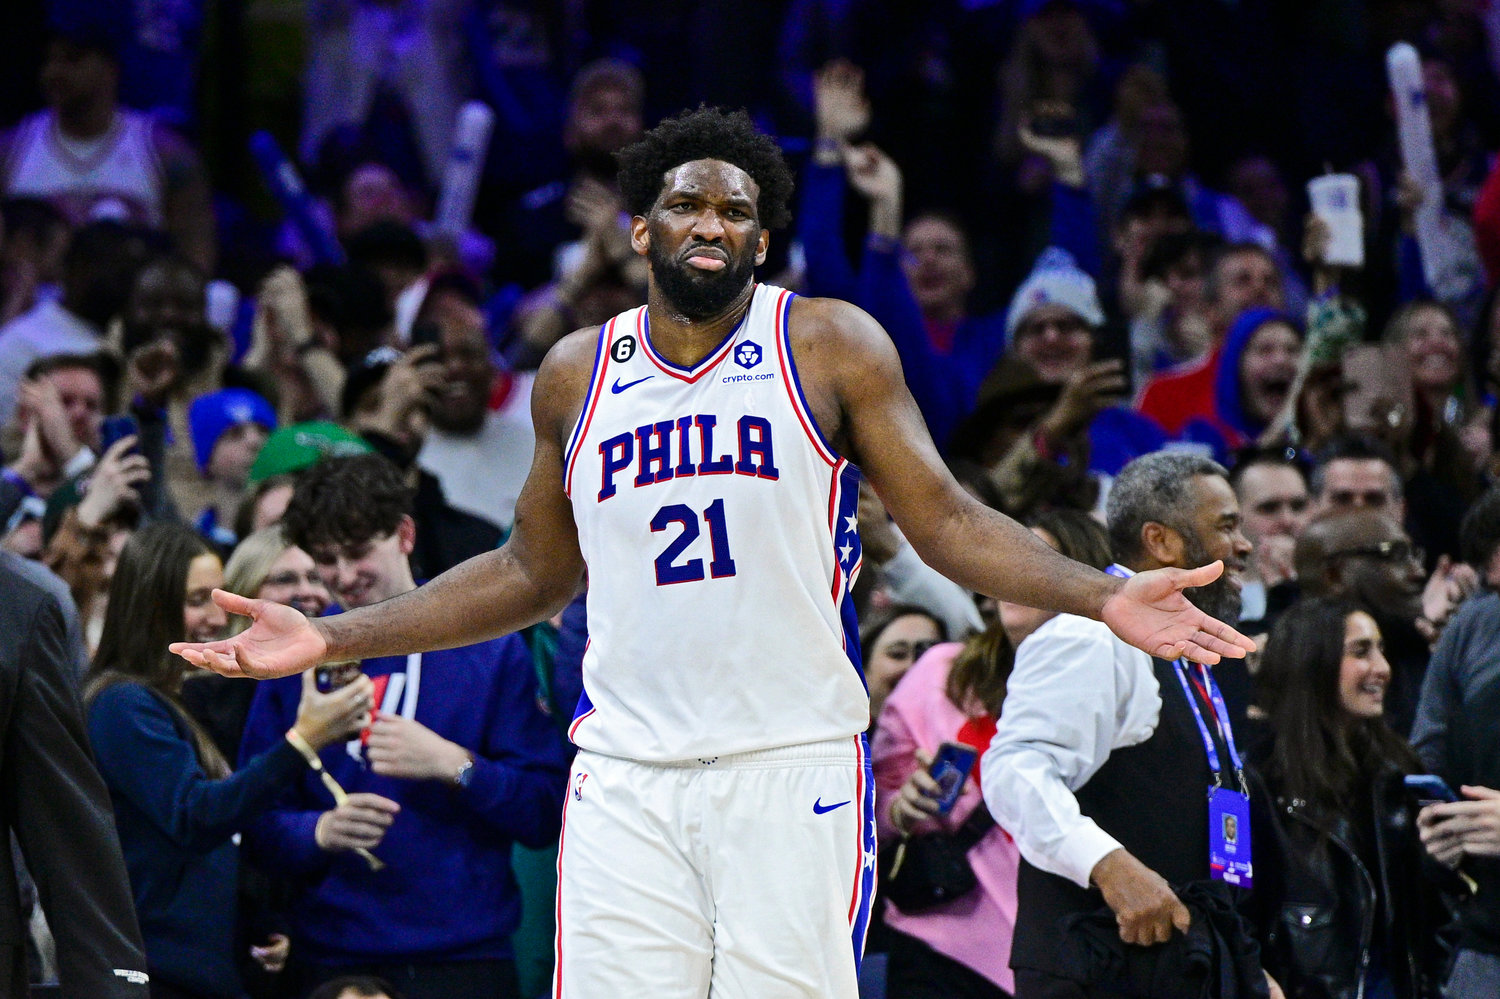 Philadelphia 76ers' Joel Embiid reacts after a play during the second half of an NBA basketball game against the Denver Nuggets, Saturday, Jan. 28, 2023, in Philadelphia.